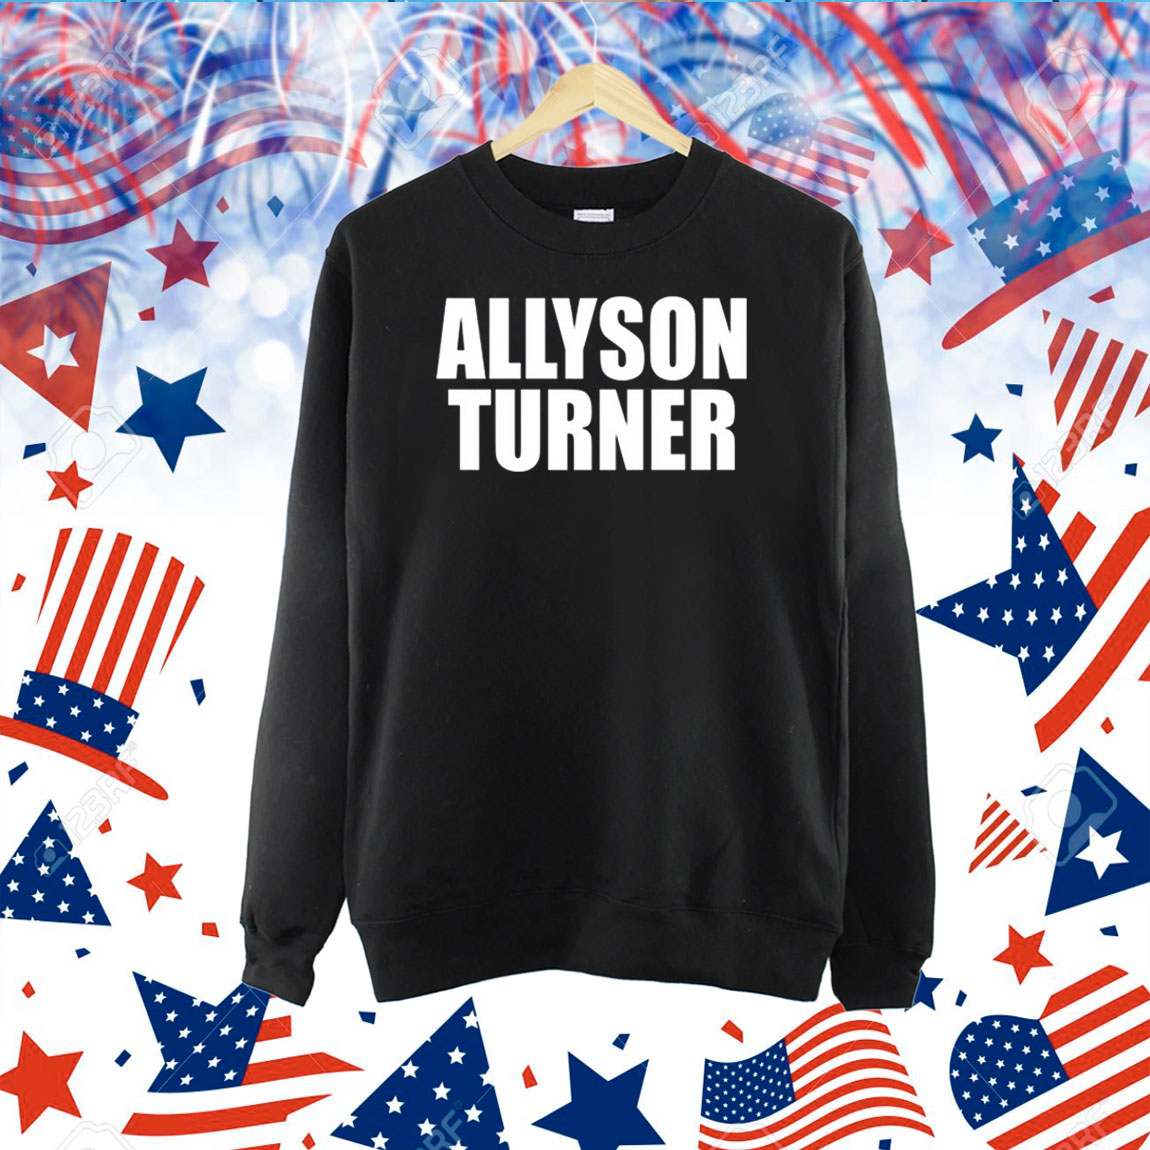 Lucy Rohden Allyson Turner Shirts